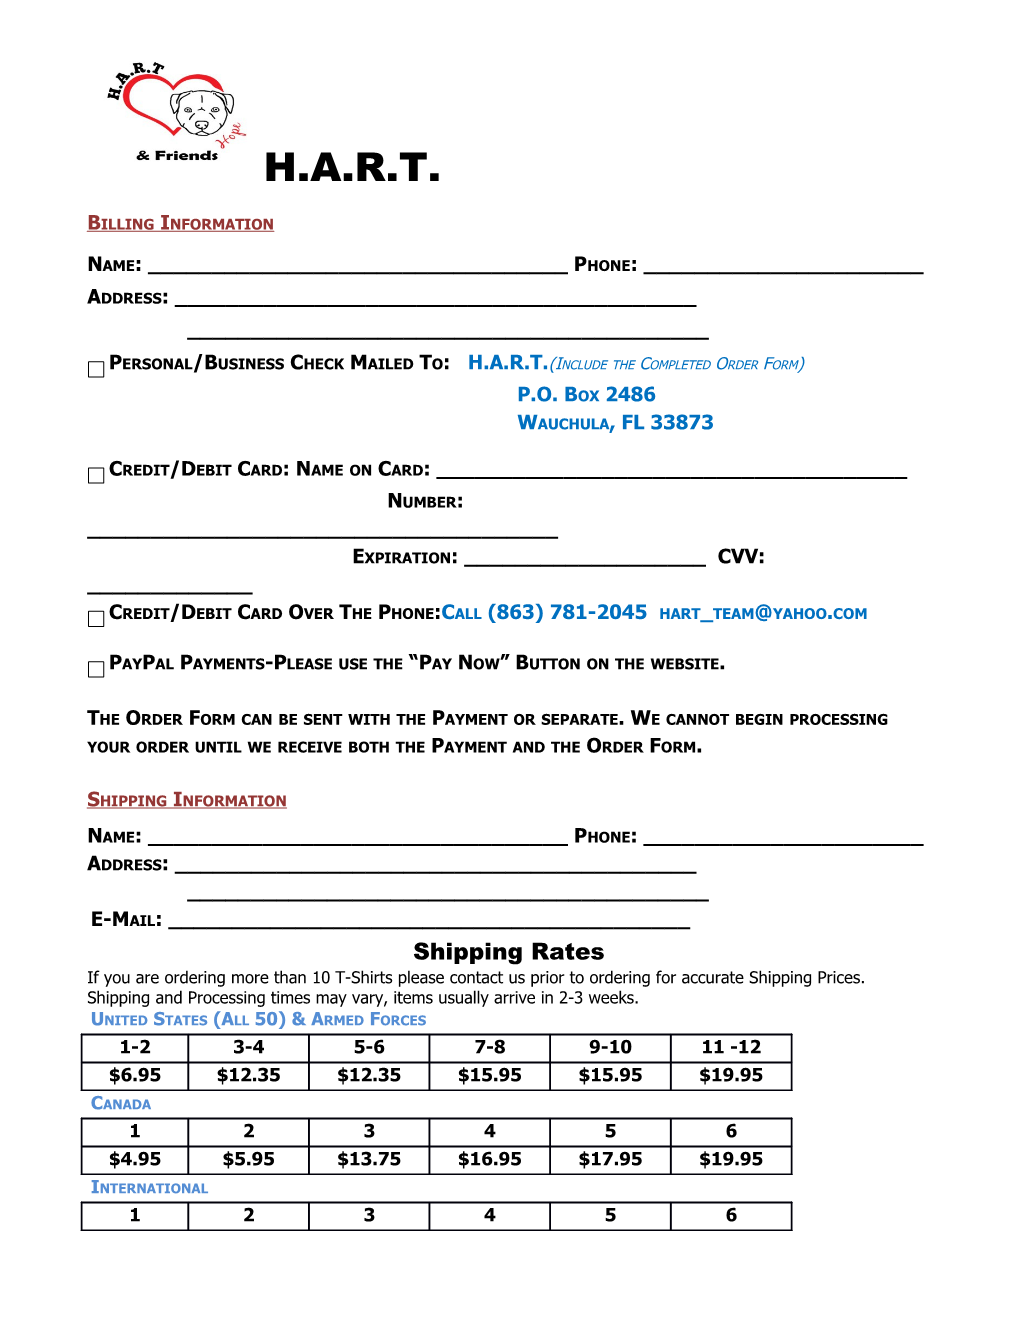 Personal/Business Check Mailed To: H.A.R.T.(Include the Completed Order Form)